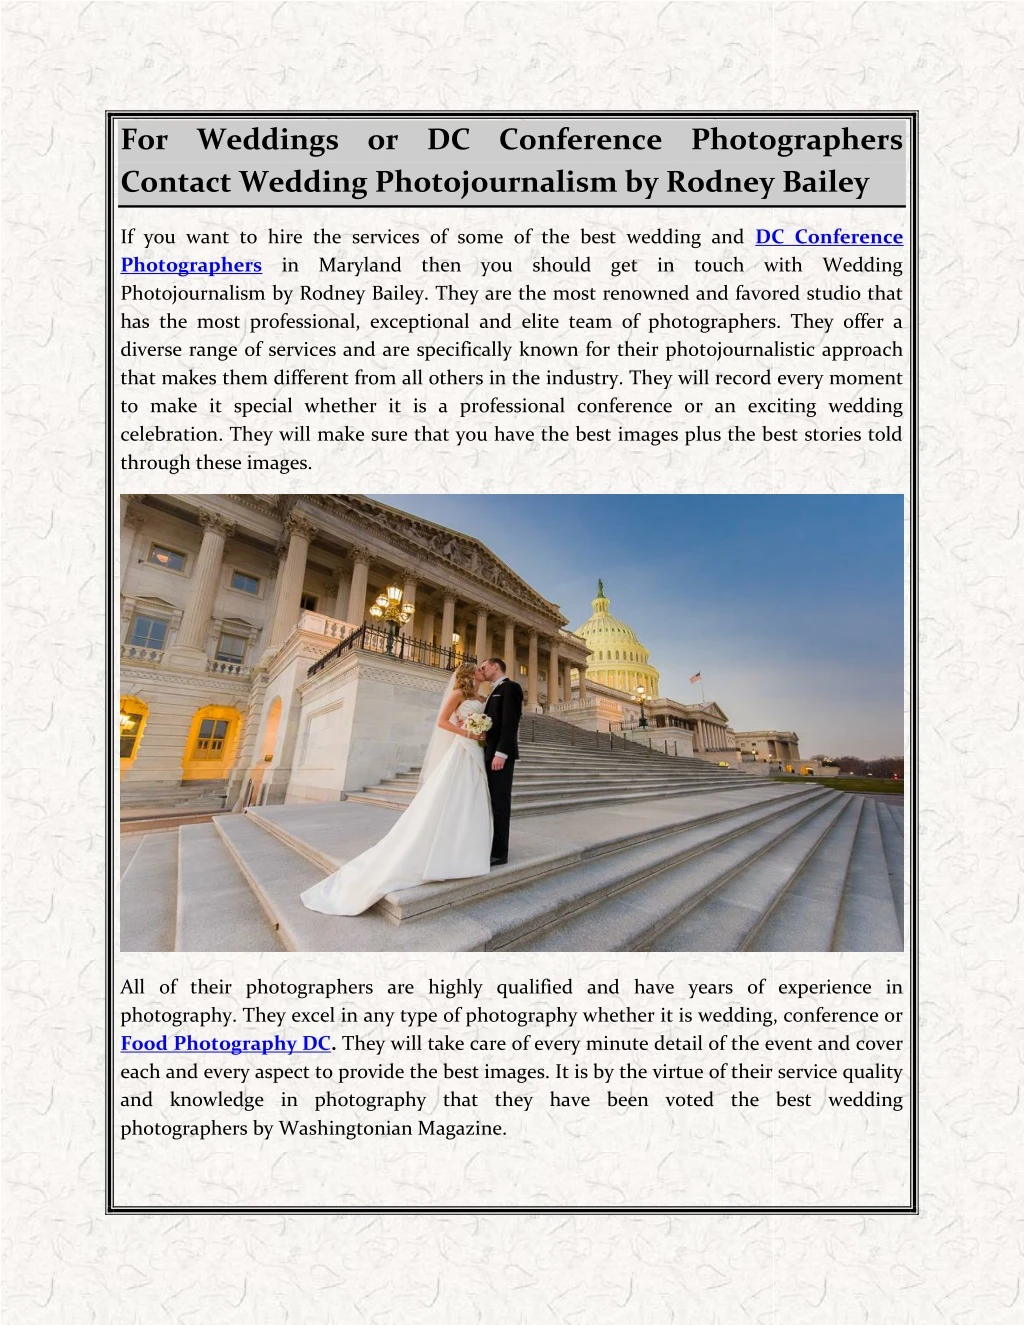 for weddings or dc conference photographers